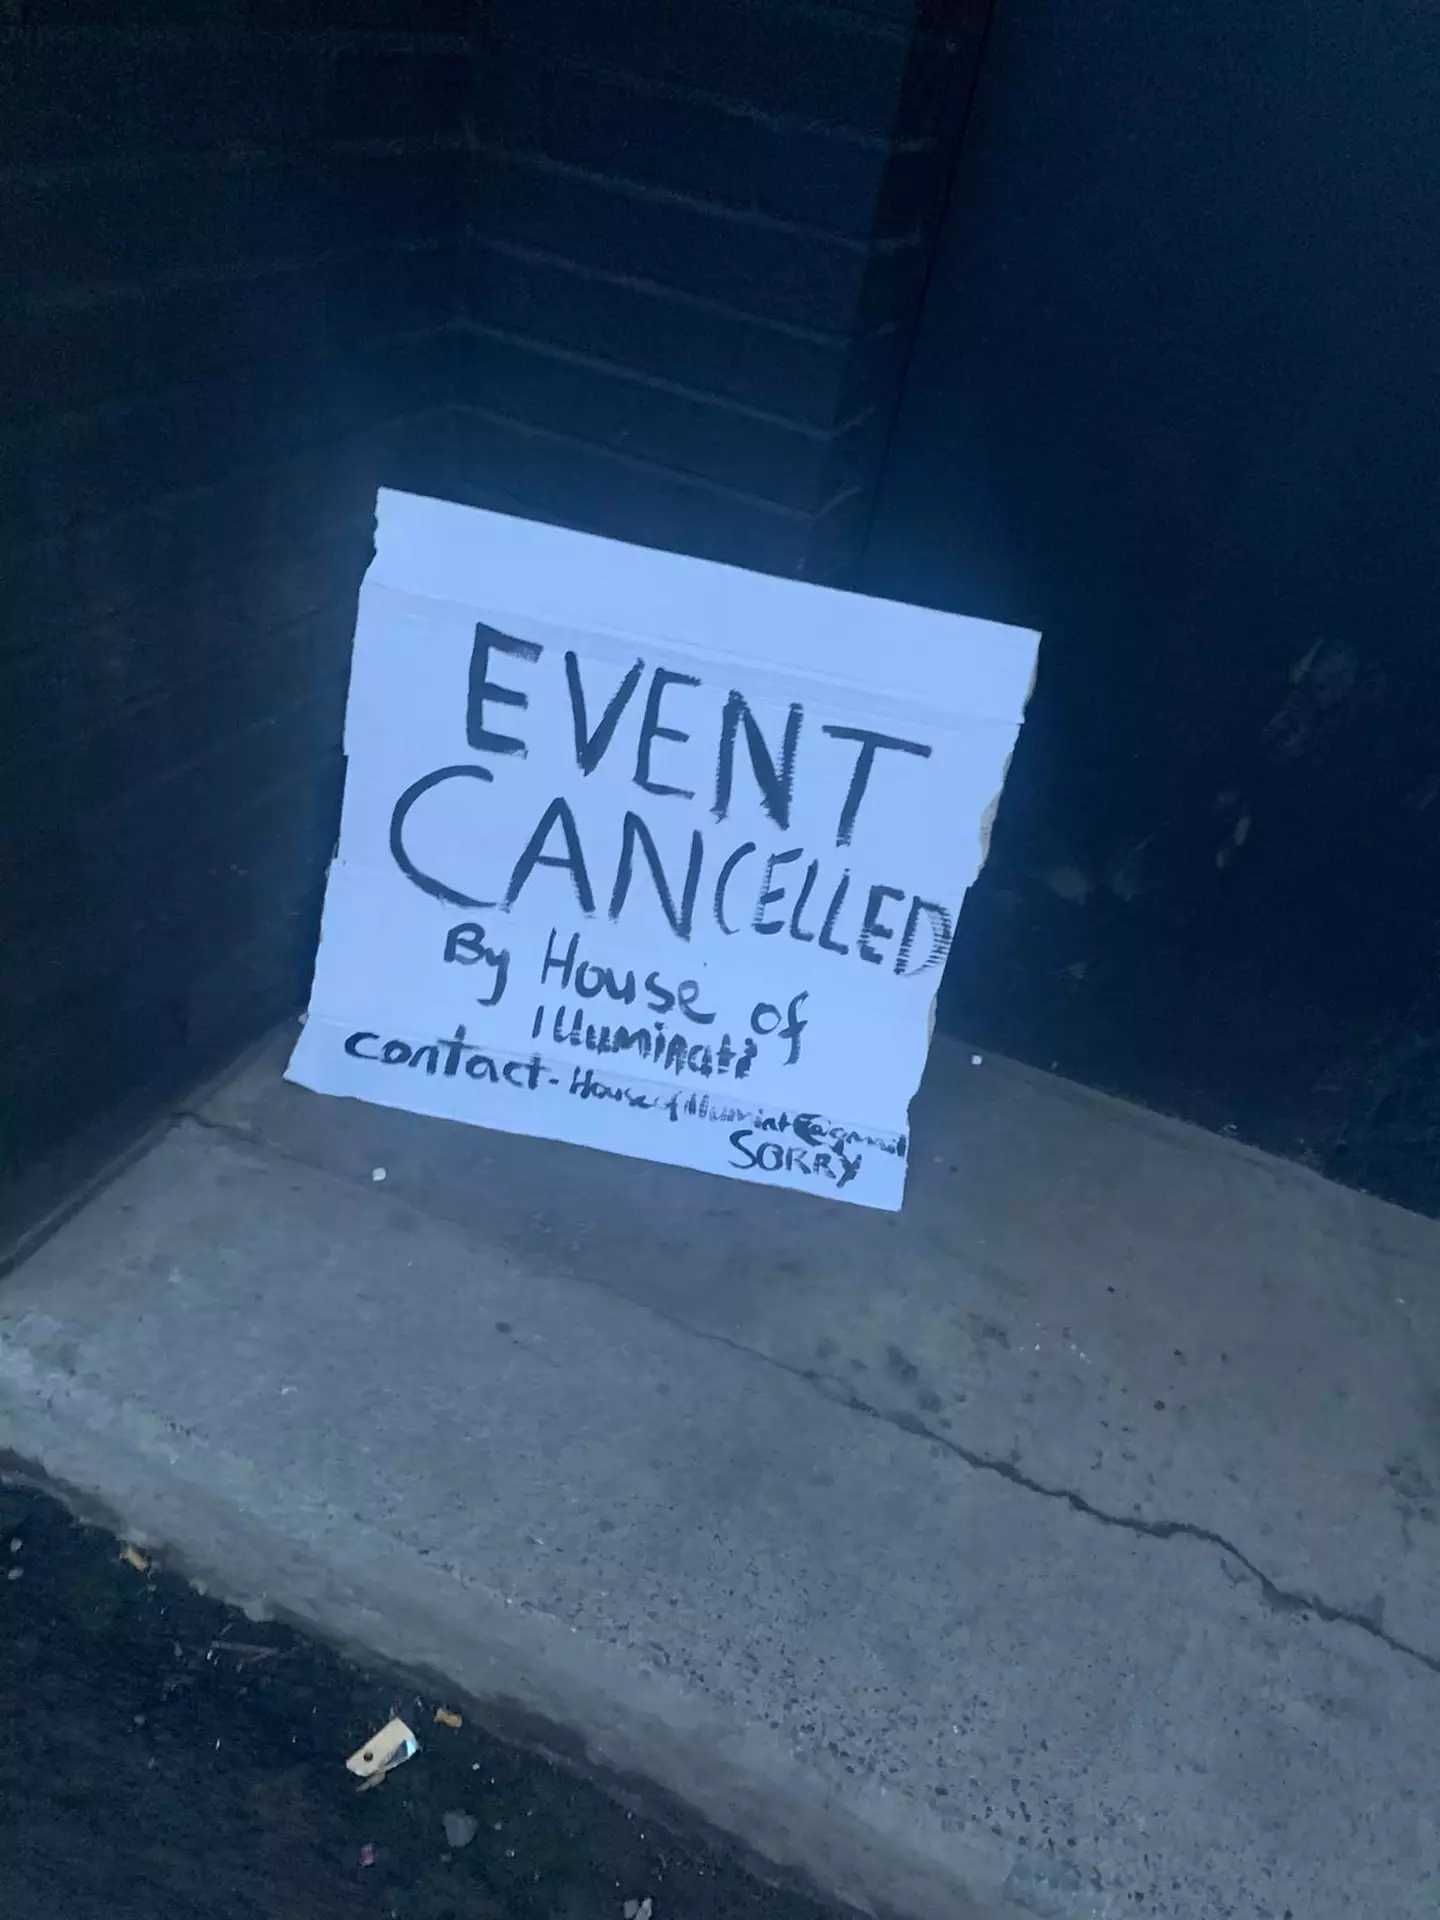 The event was cancelled in the end.